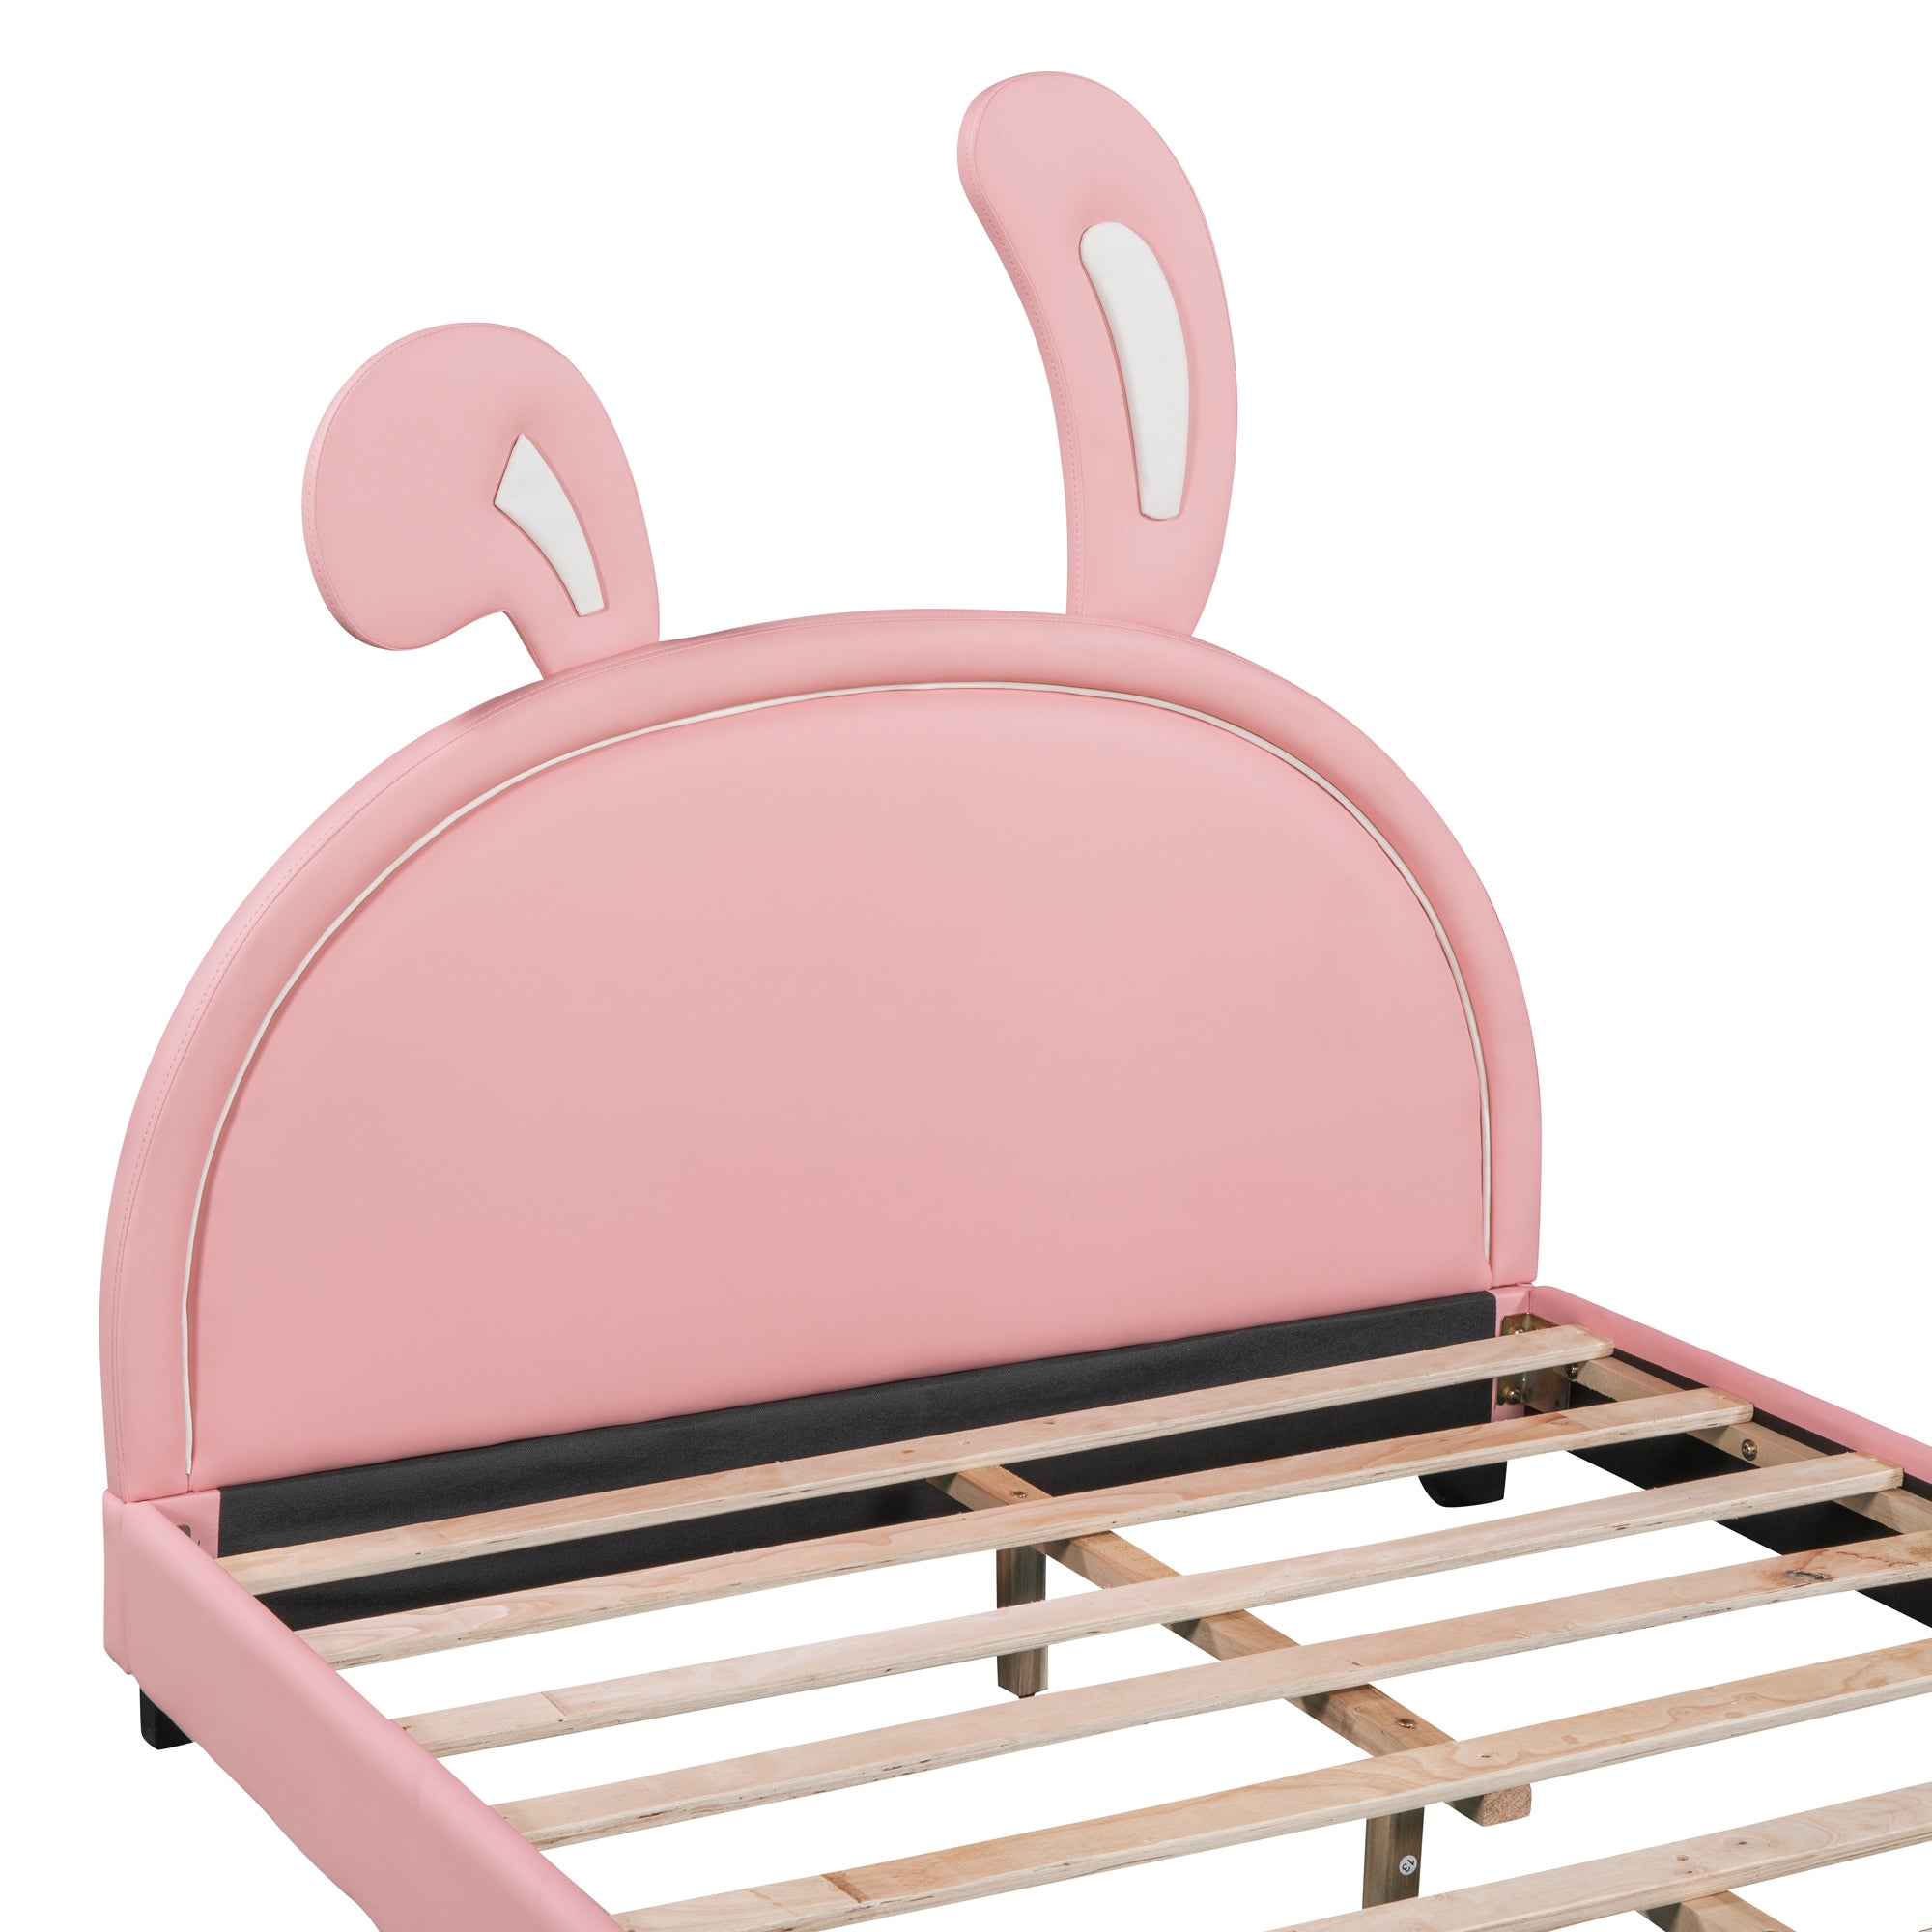 ZNTS Full Size Upholstered Leather Platform Bed with Rabbit Ornament, Pink WF299139AAH